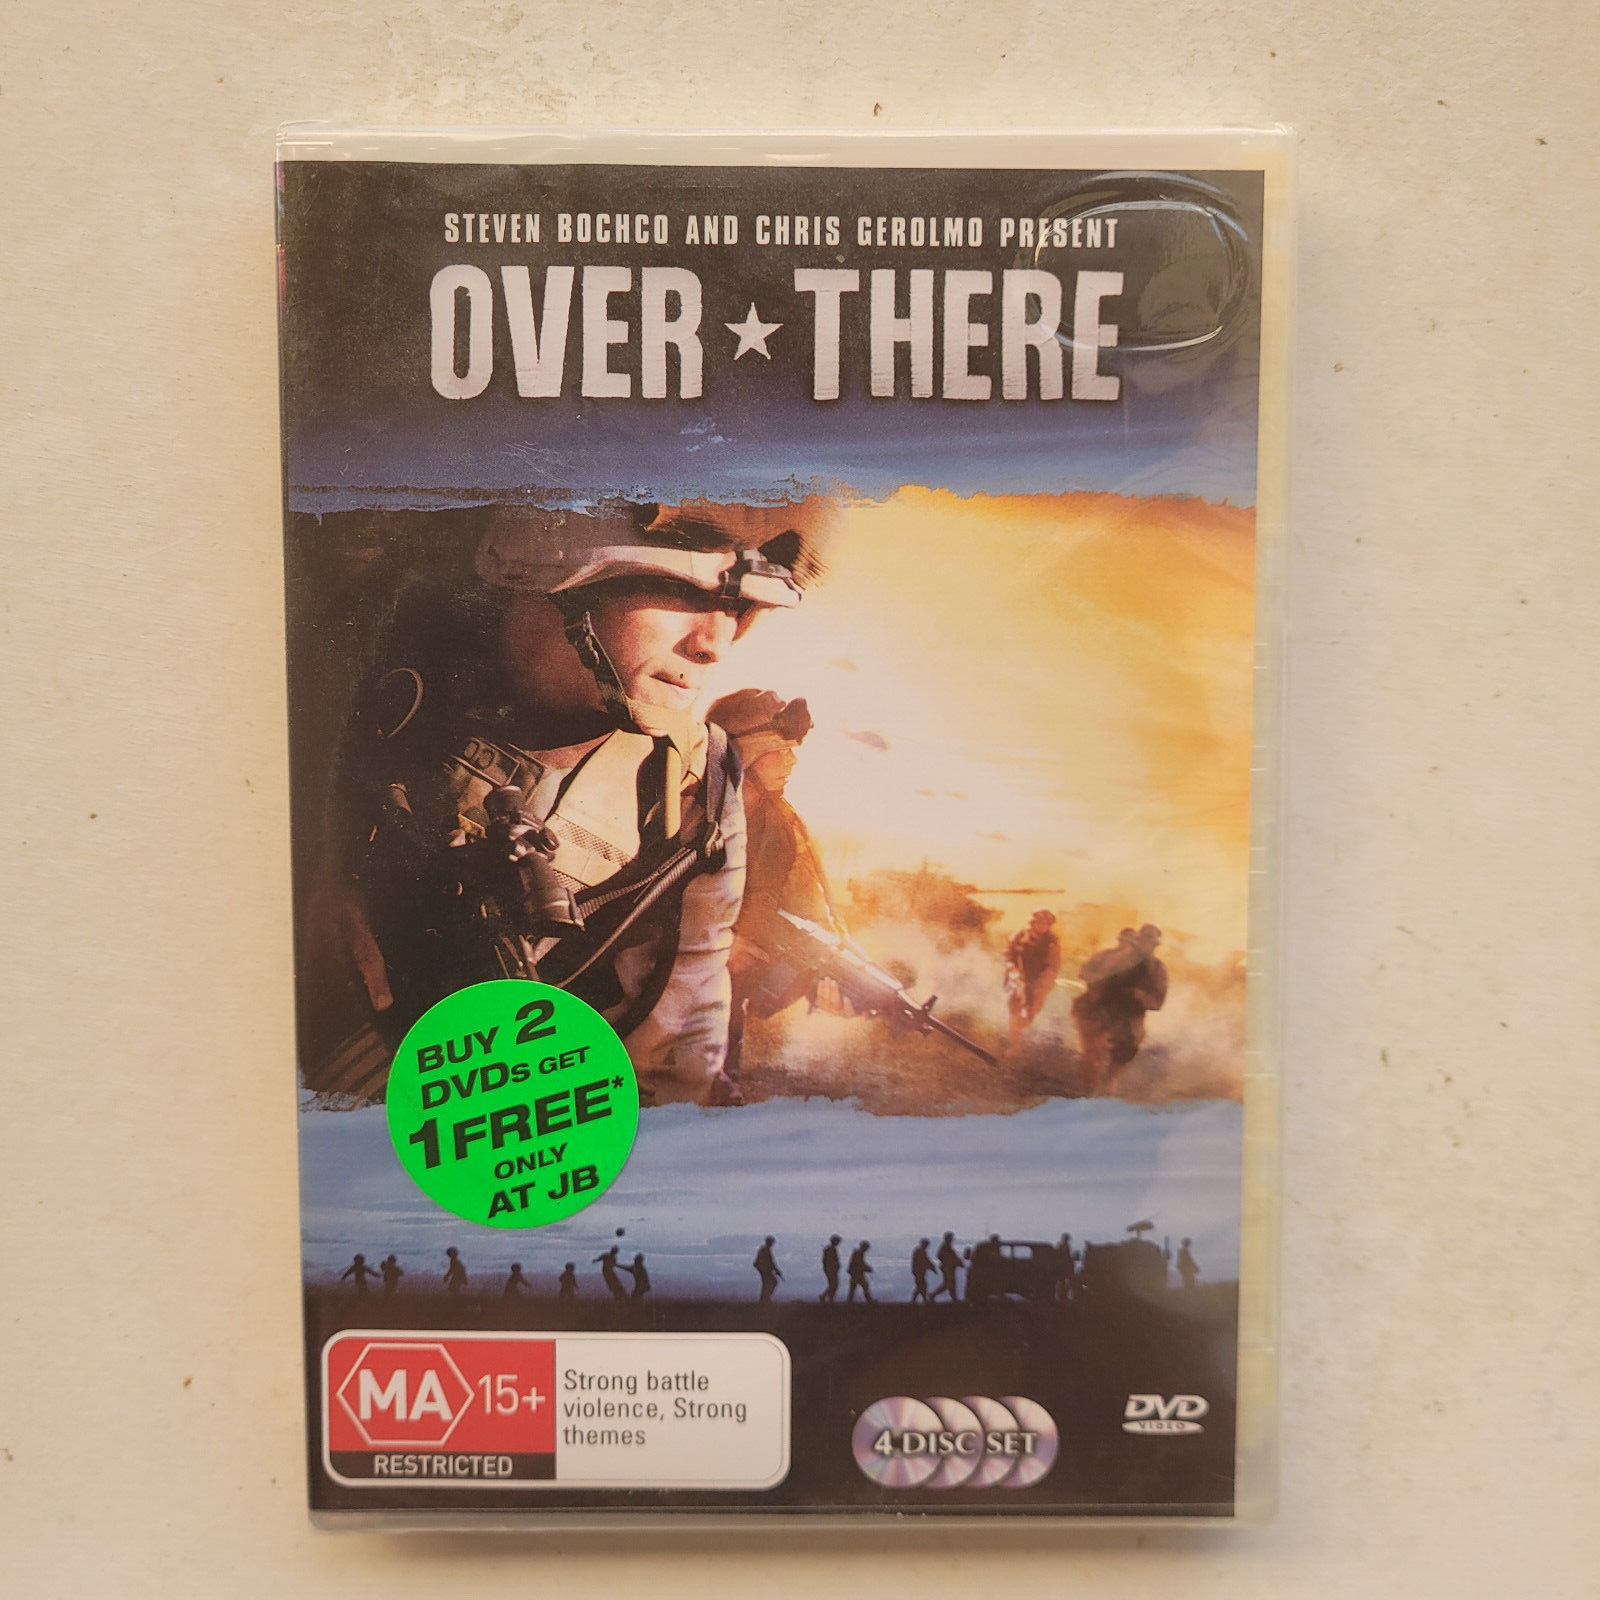 Over There Complete TV Series - Brand New Sealed Region 4 DVD - Iraq War